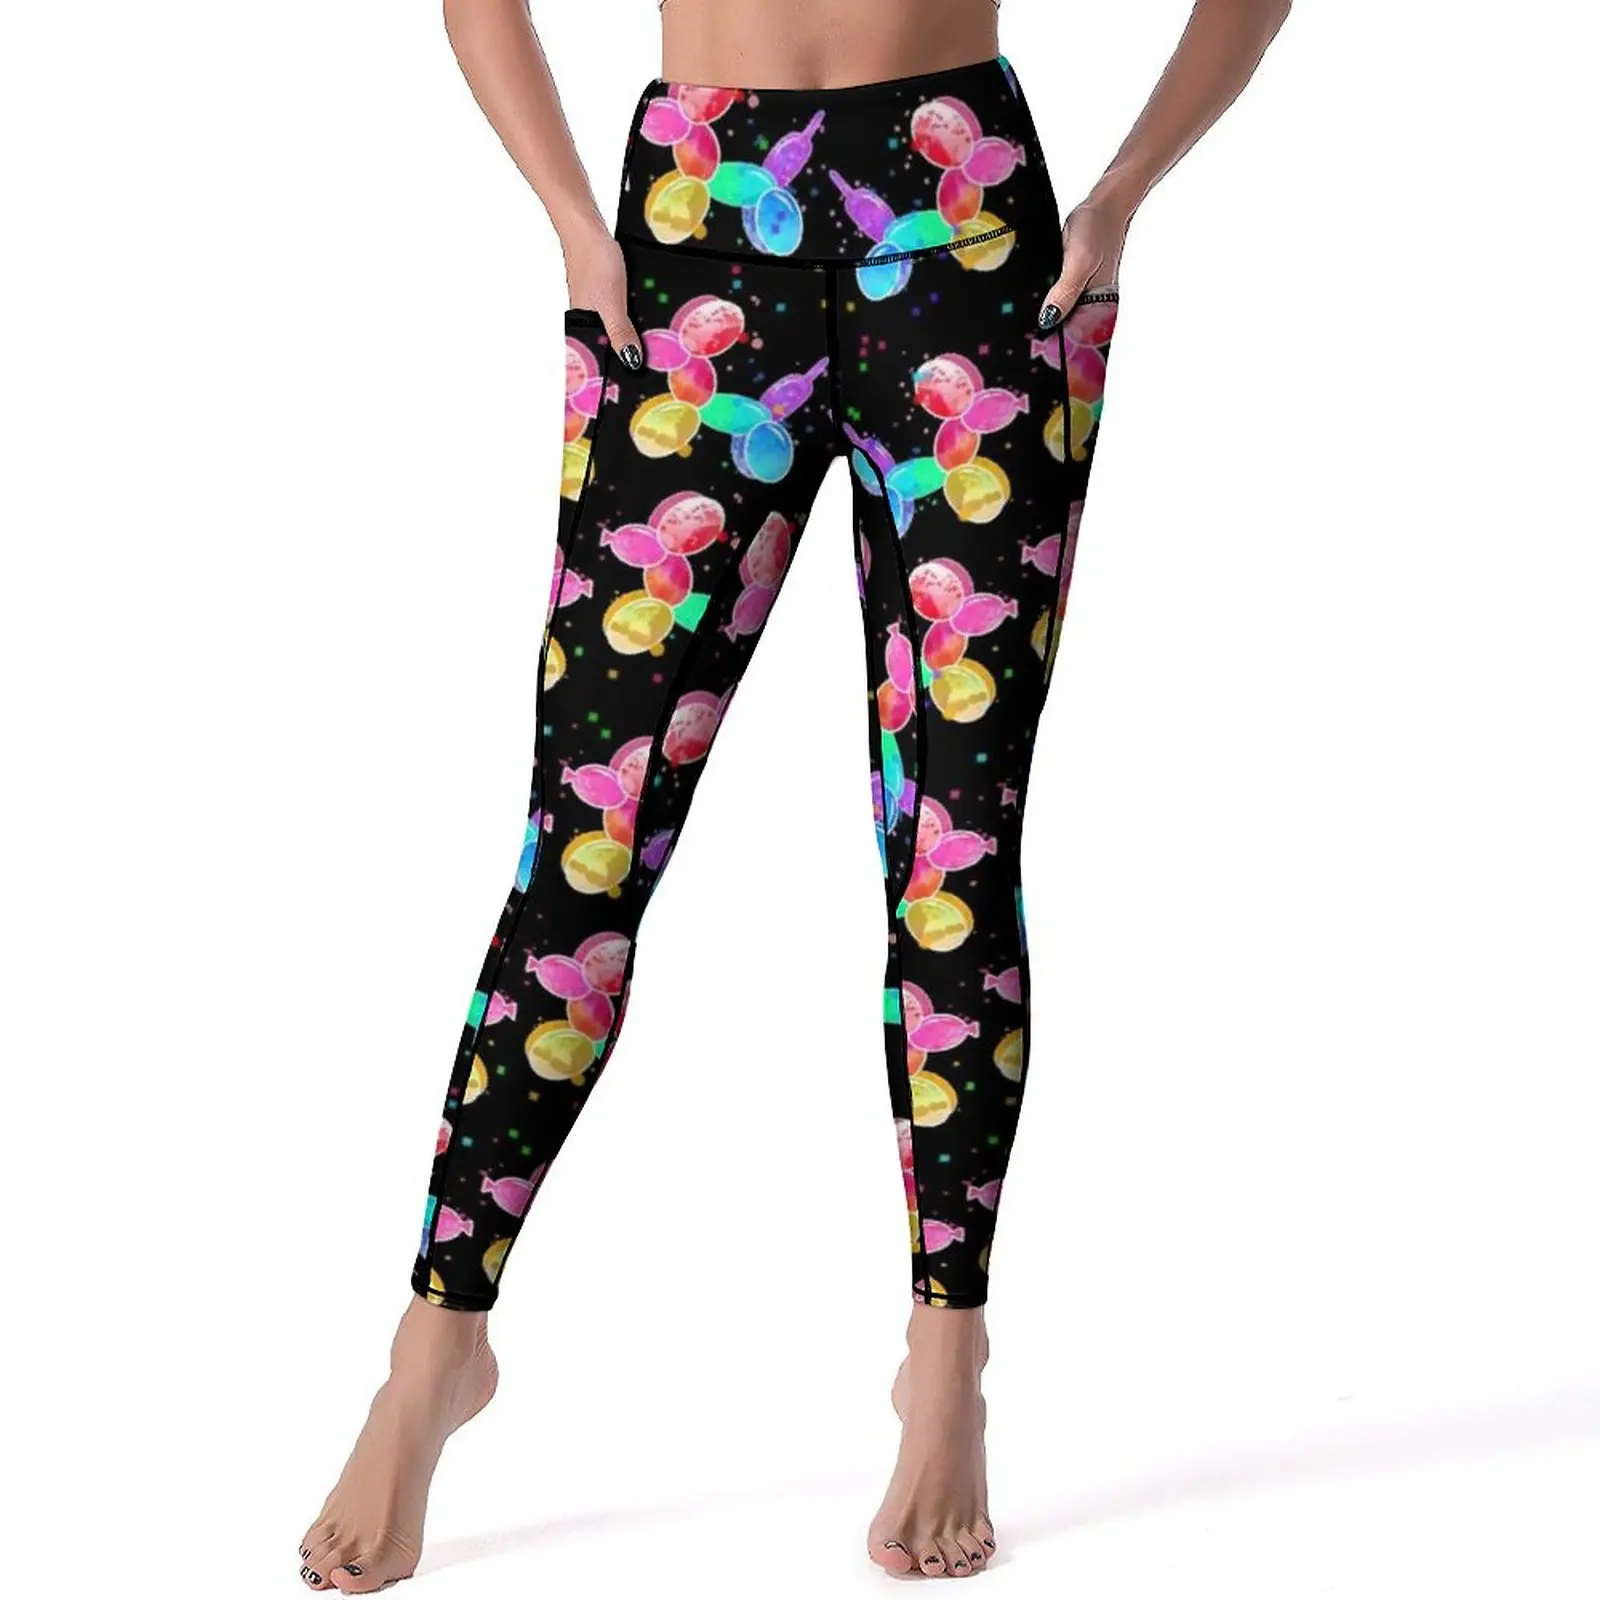 

Watercolor Balloon Yoga Pants Cute Dogs Print Leggings Sexy Push Up Retro Yoga Sports Tights Stretchy Graphic Fitness Leggins